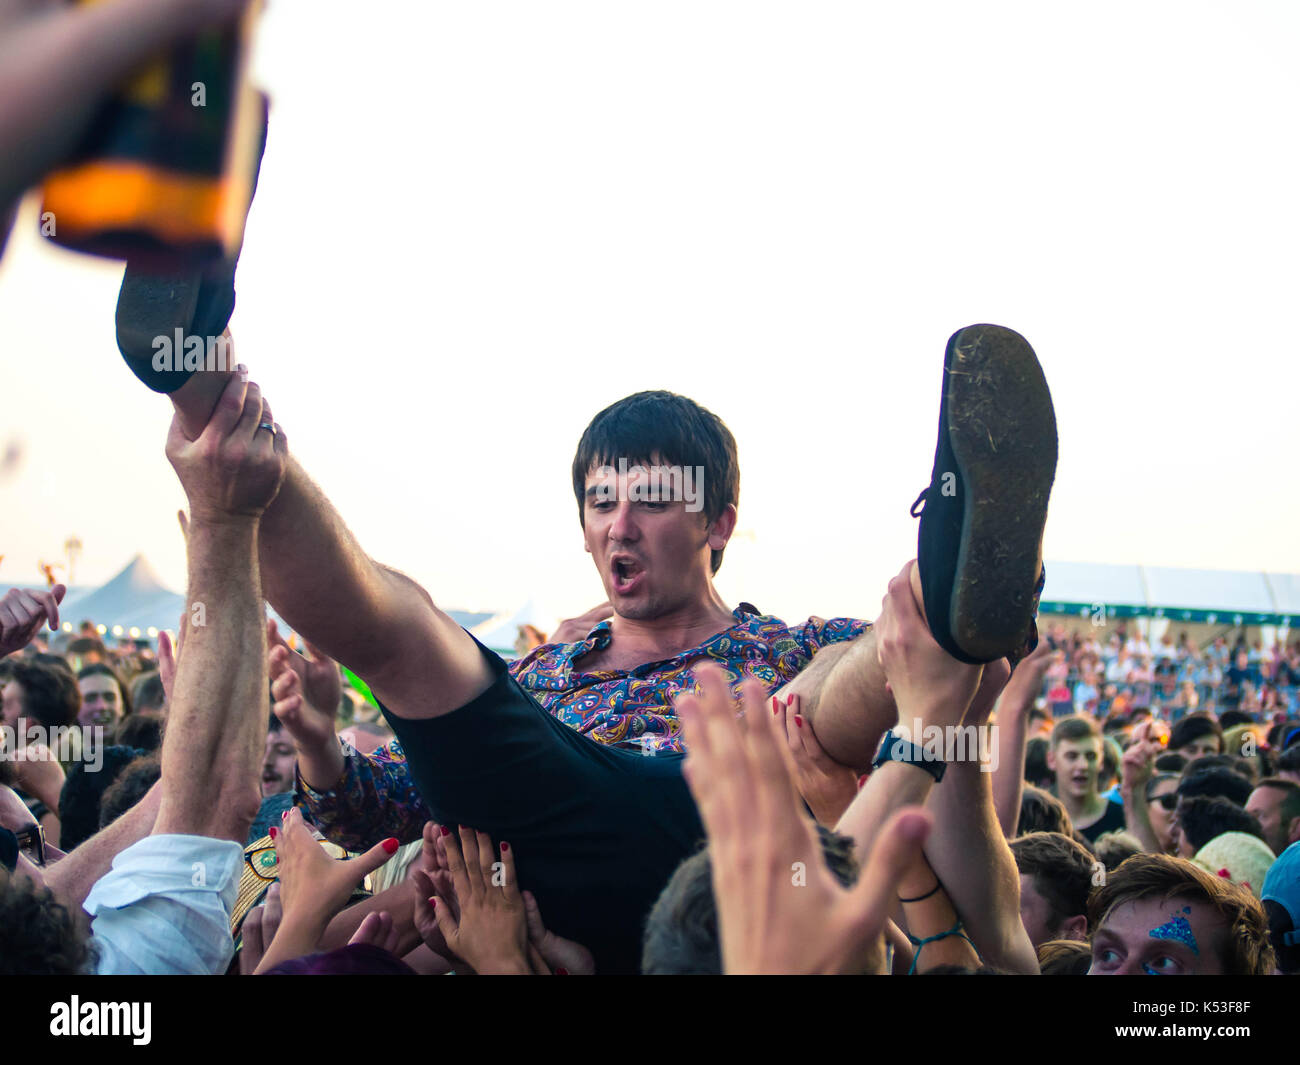 A young man crowd surfs over the audience at the Victorious music festival in Portsmouth, England Stock Photo